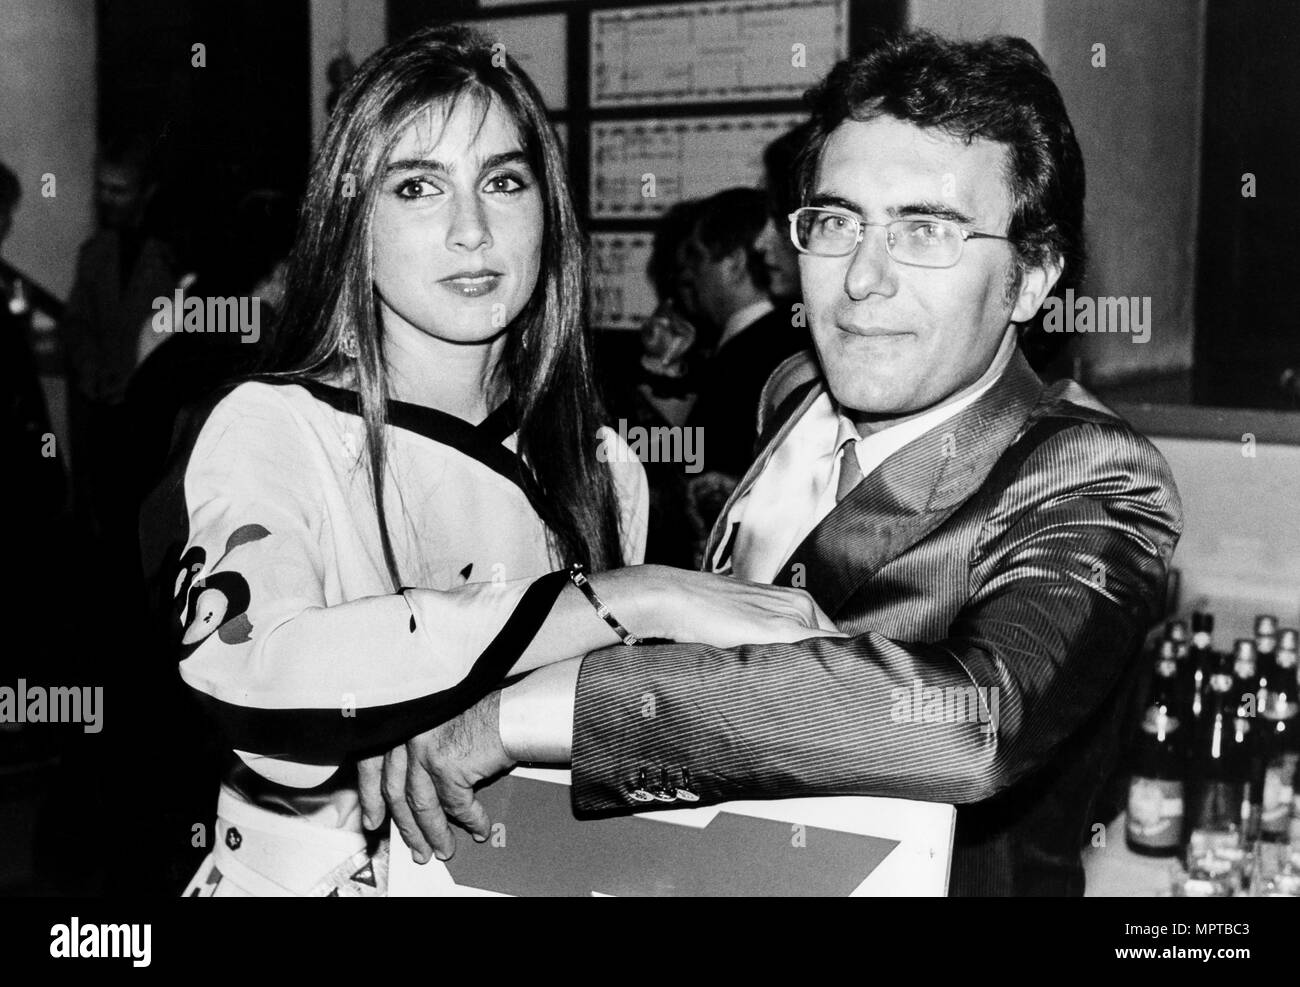 Al bano and romina power hi-res stock photography and images - Alamy